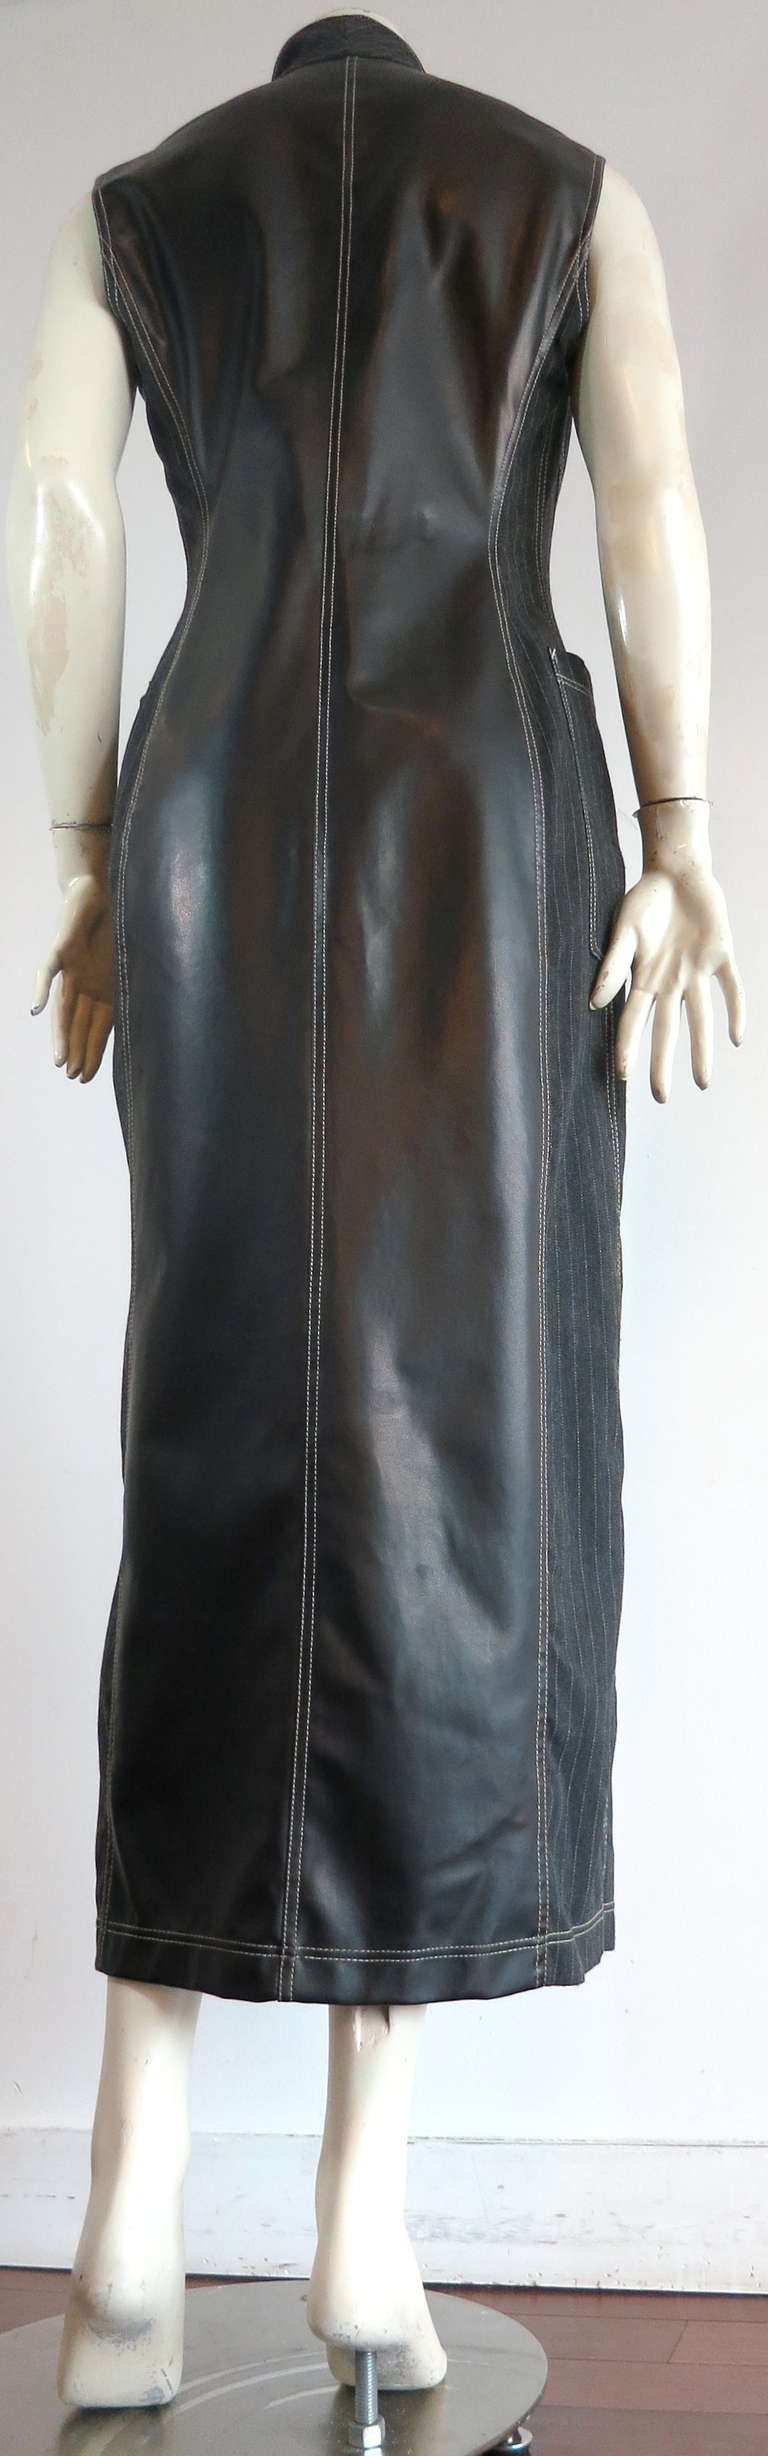 1980's GAULTIER Pinstripe coat dress with PVC/Pleather back panel.

This amazing tailored coat dress was designed by Jean-Paul Gaultier under his early line, Junior Gaultier manufactured by Gibo, and was made in Italy during the 1980's.

The